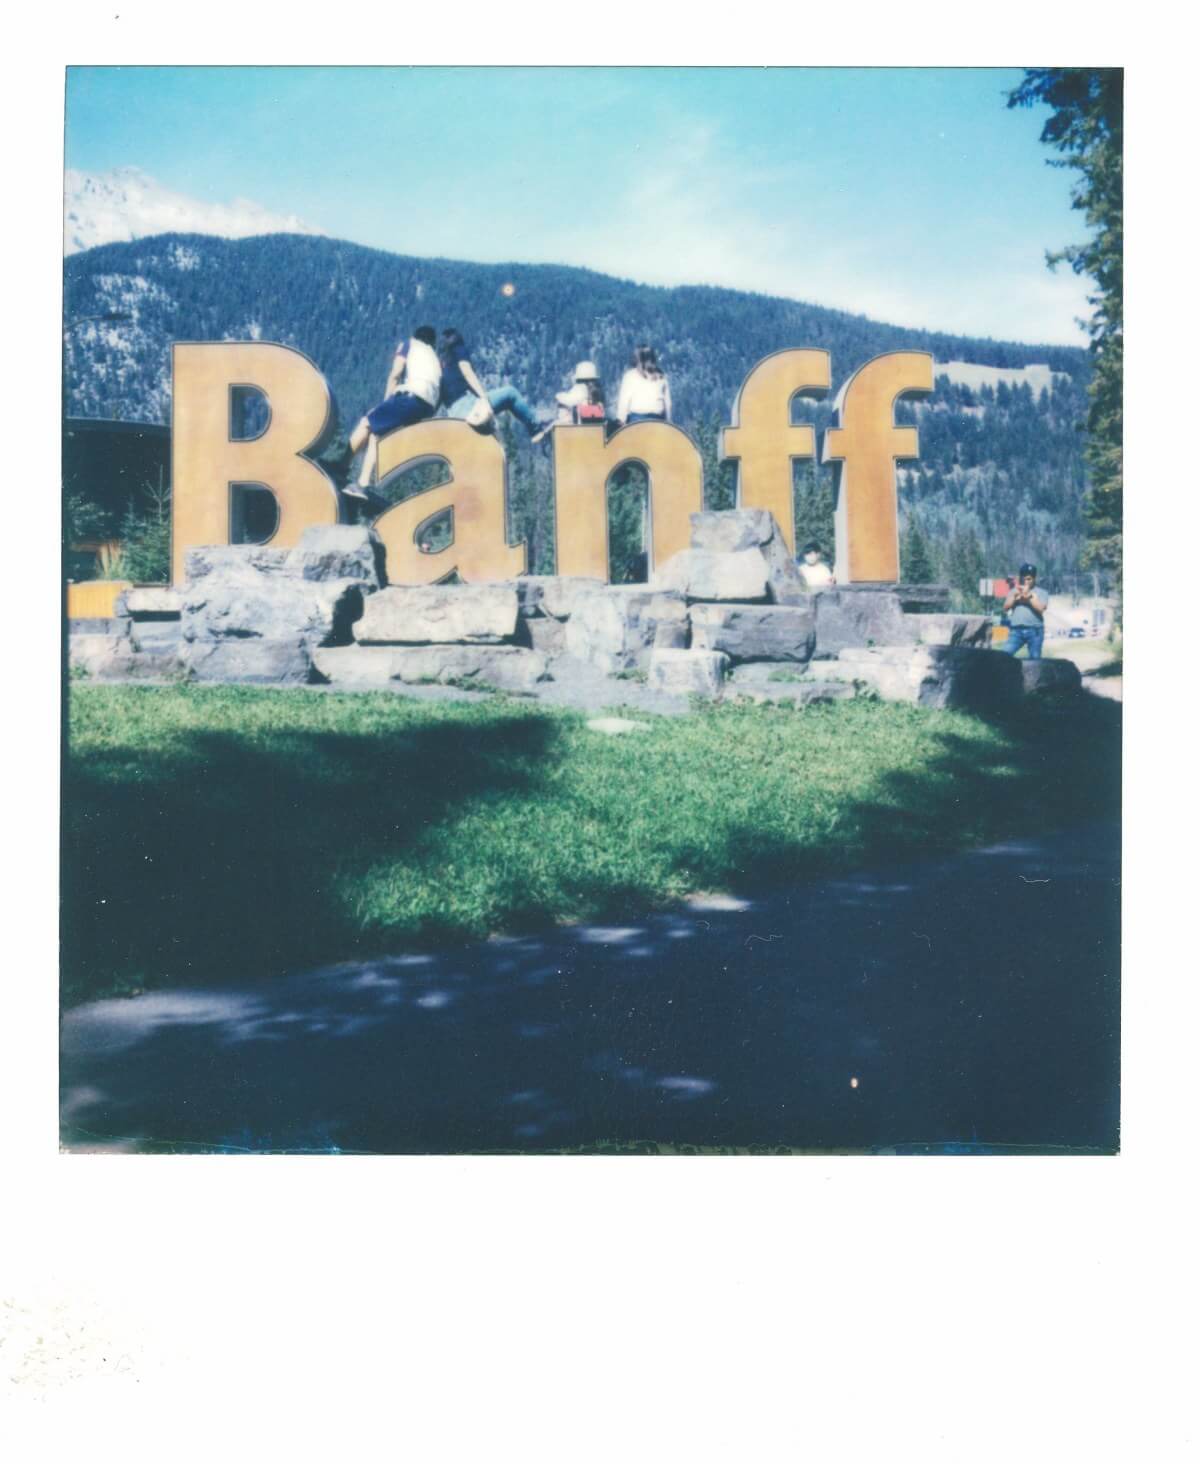 The back of the Banff sign, reversed by the camera